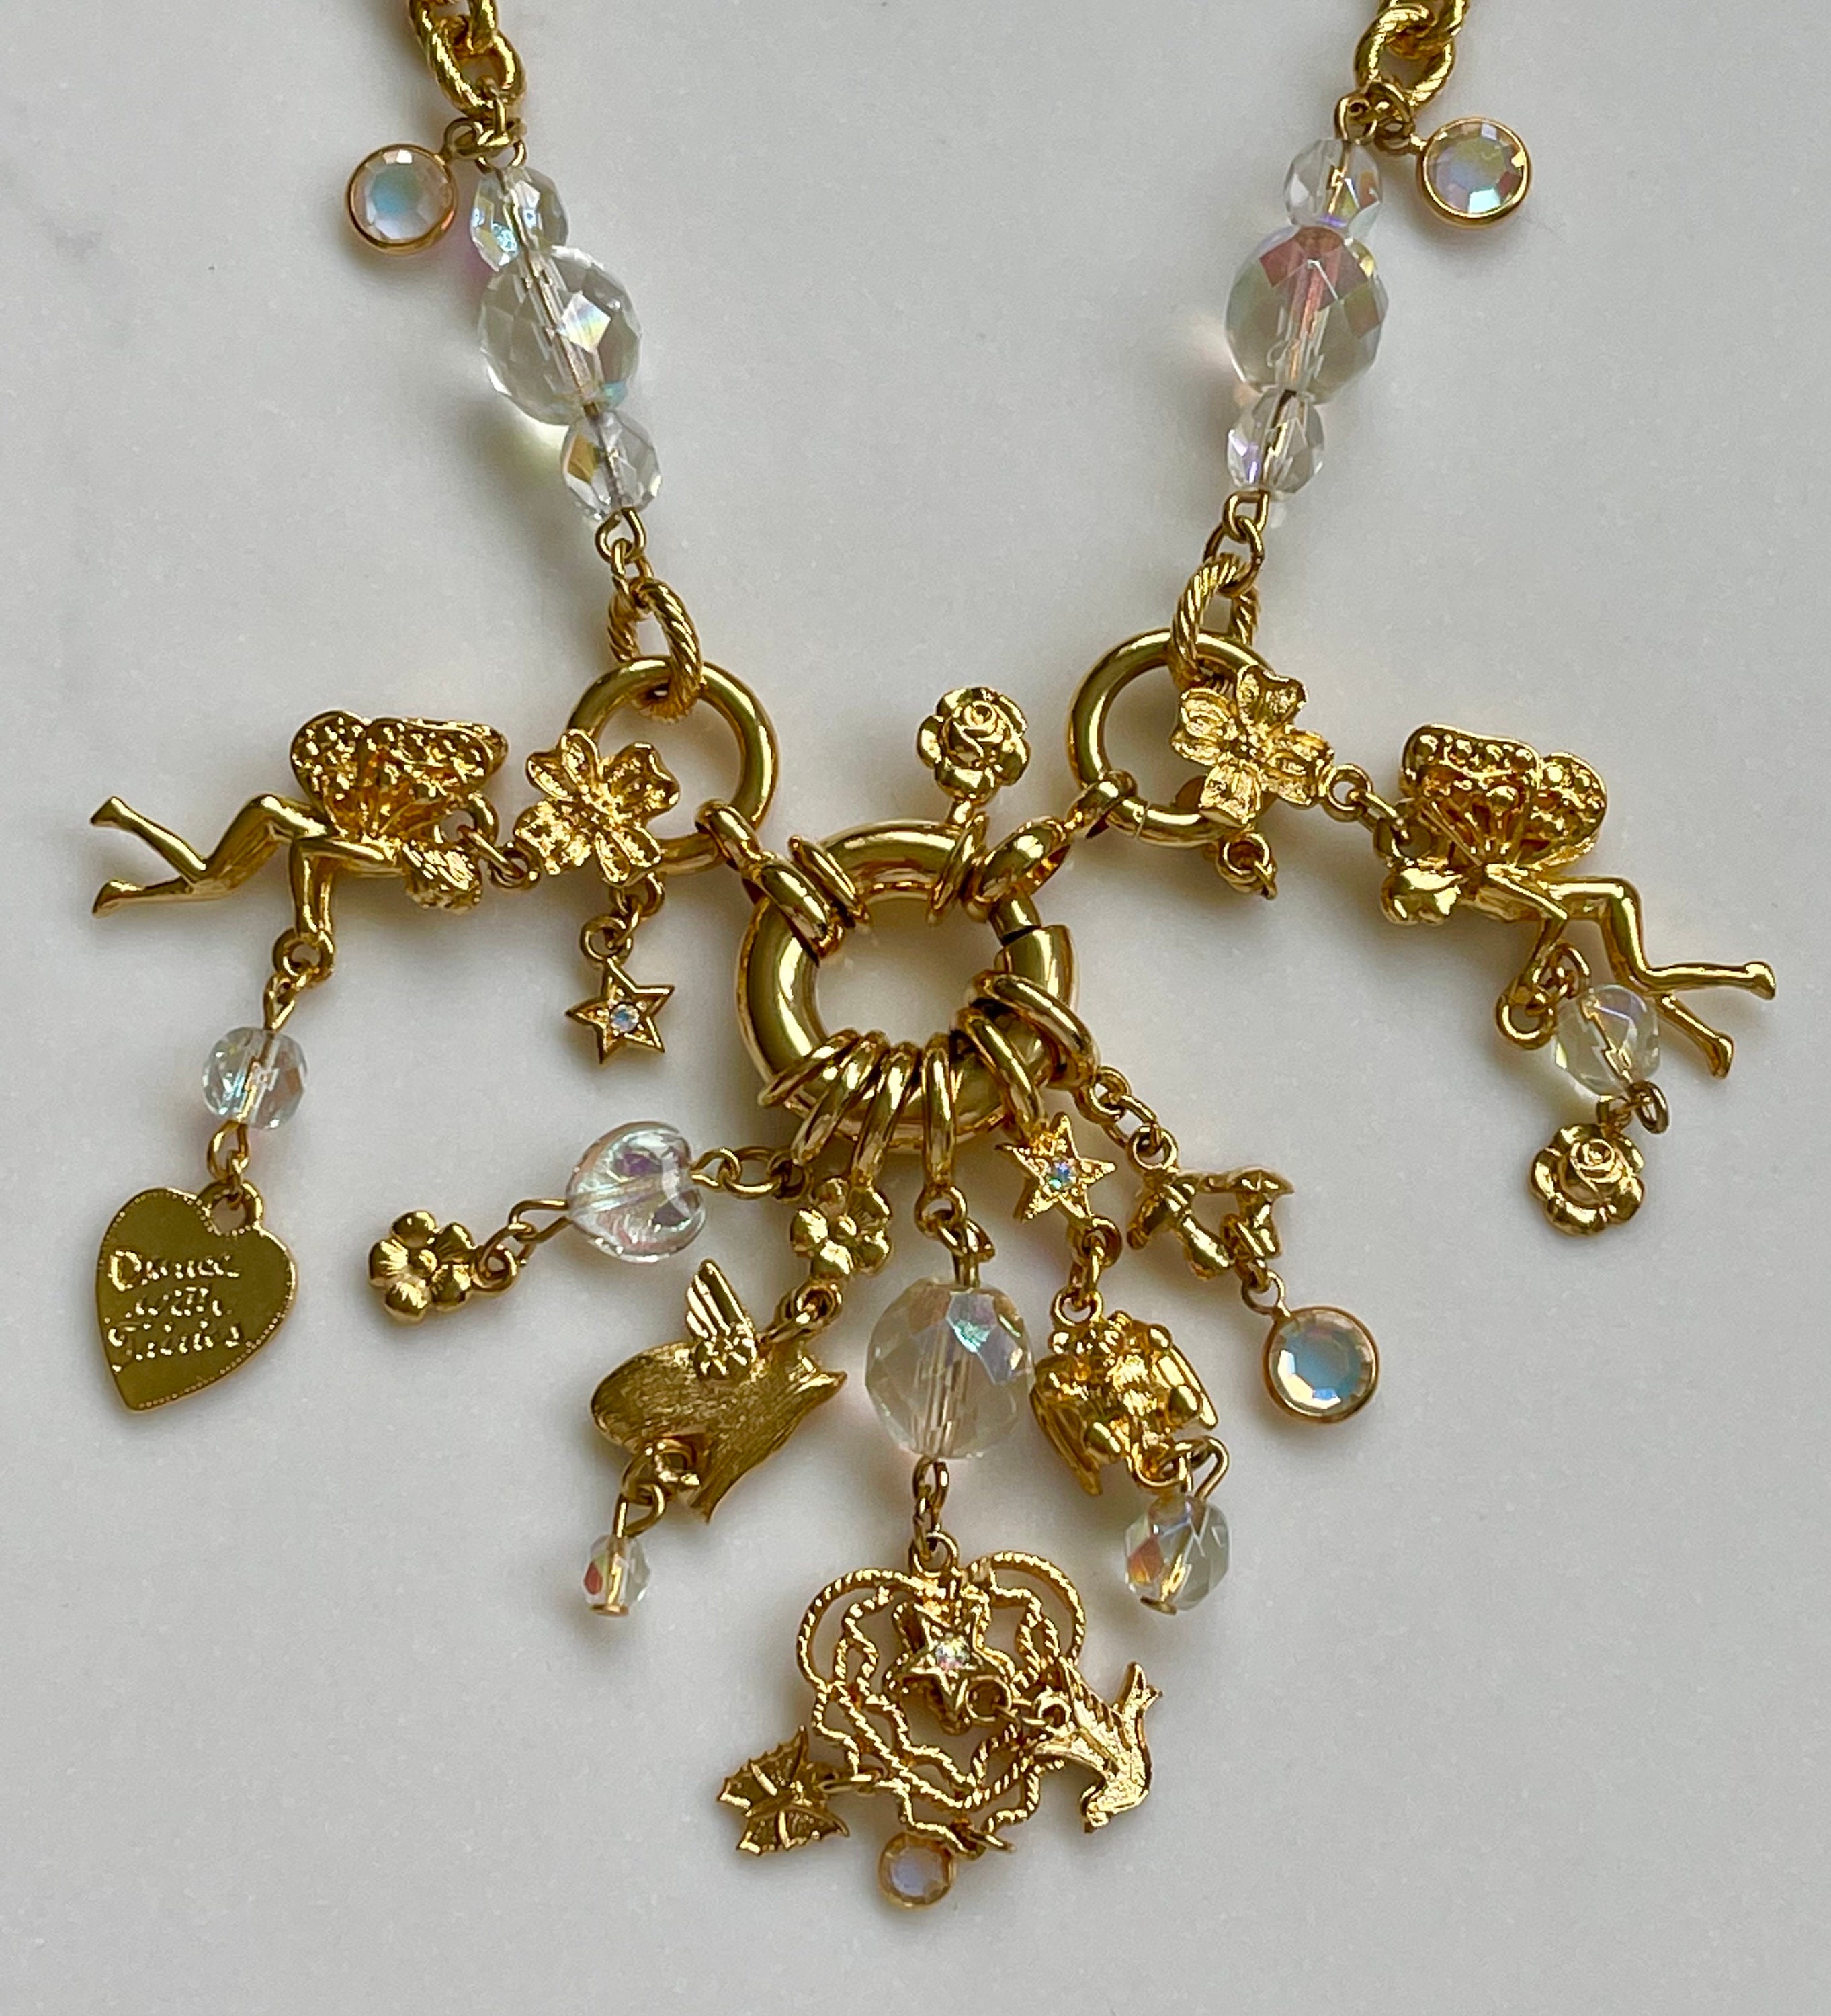 Vintage Kirks Folly Charm Necklace, Dance With Fairies, AB Crystals and 21  Charms, Retired Kirks Folly Jewelry - Etsy | Kirks folly jewelry, Original  necklace, Charm necklace